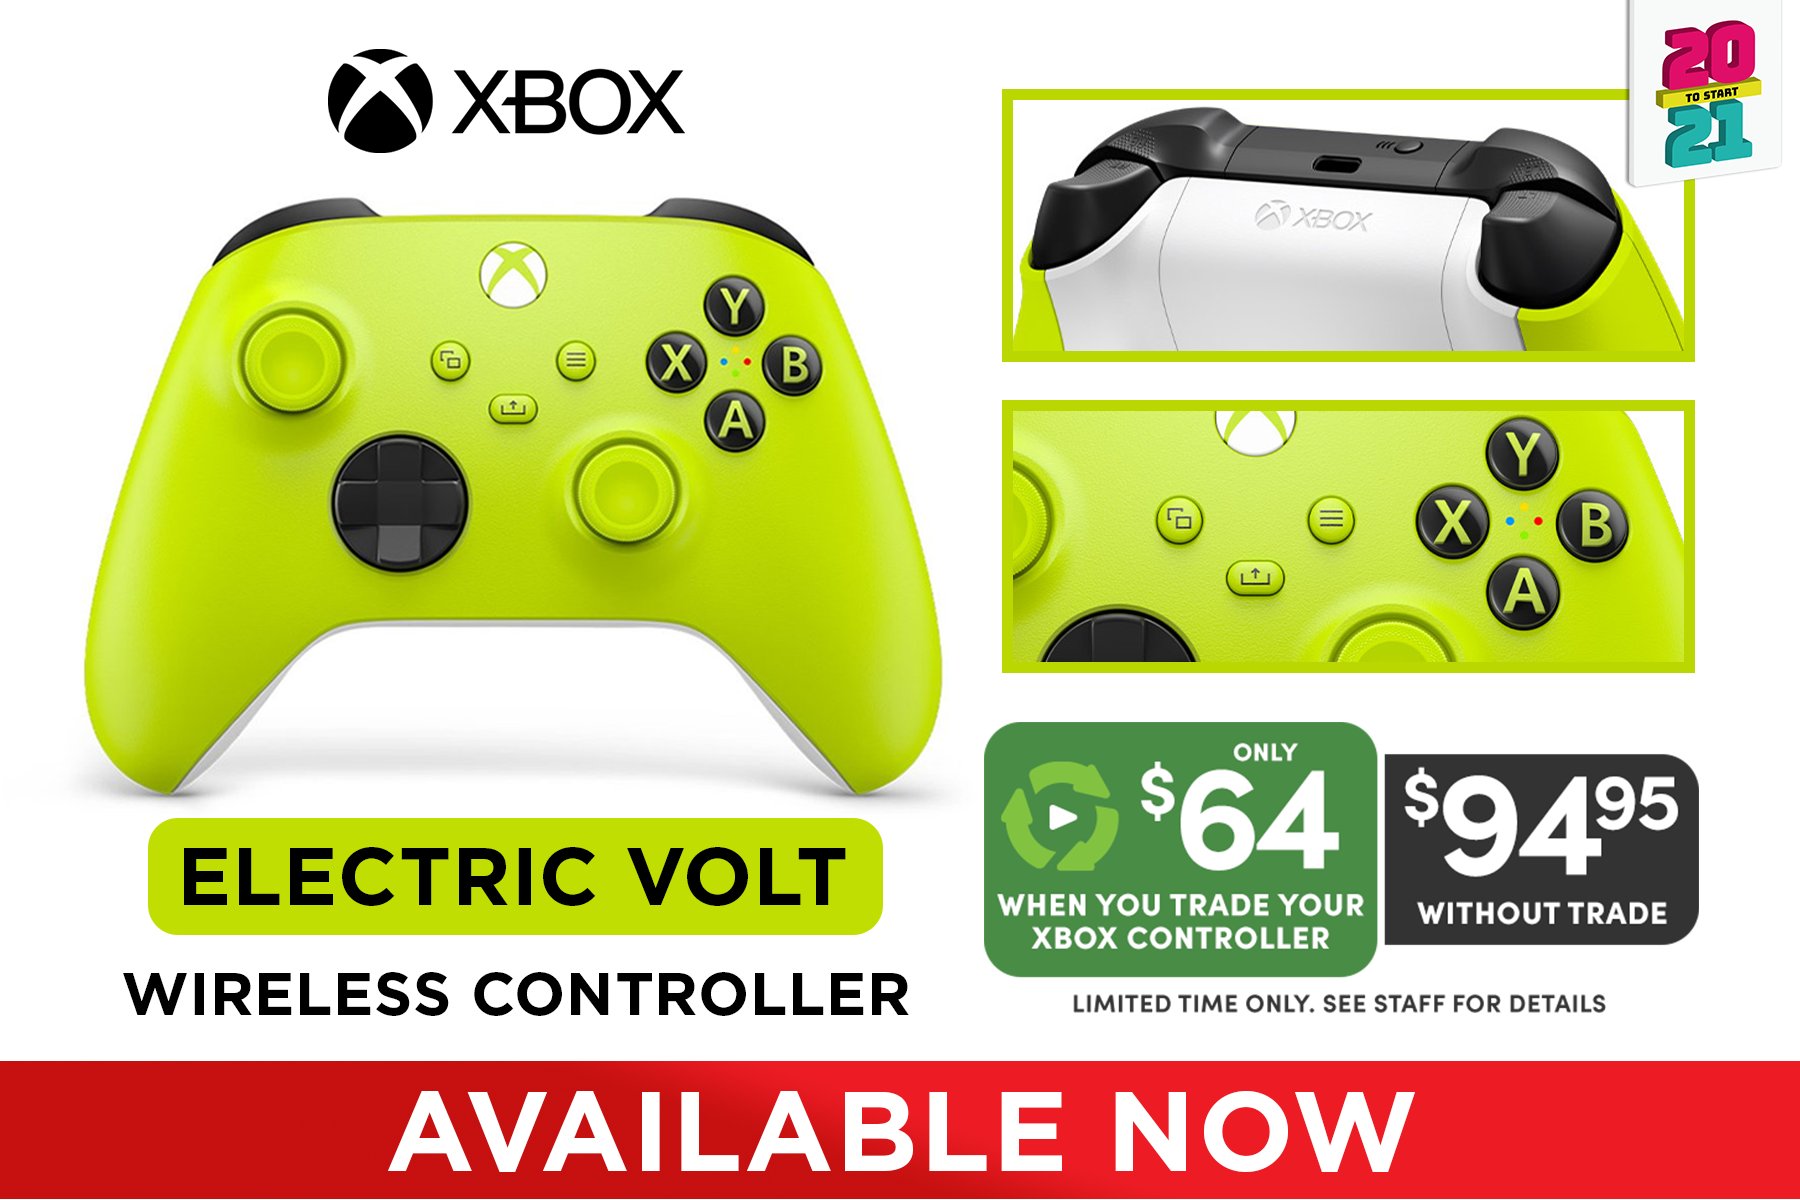 NOW! Xbox Games comfort Volt and your Electric / game: Australia sculpted https://t.co/zNzoTG0TqI Controller is enhanced geometry Featuring for Wireless https://t.co/UMouaoUDGC\